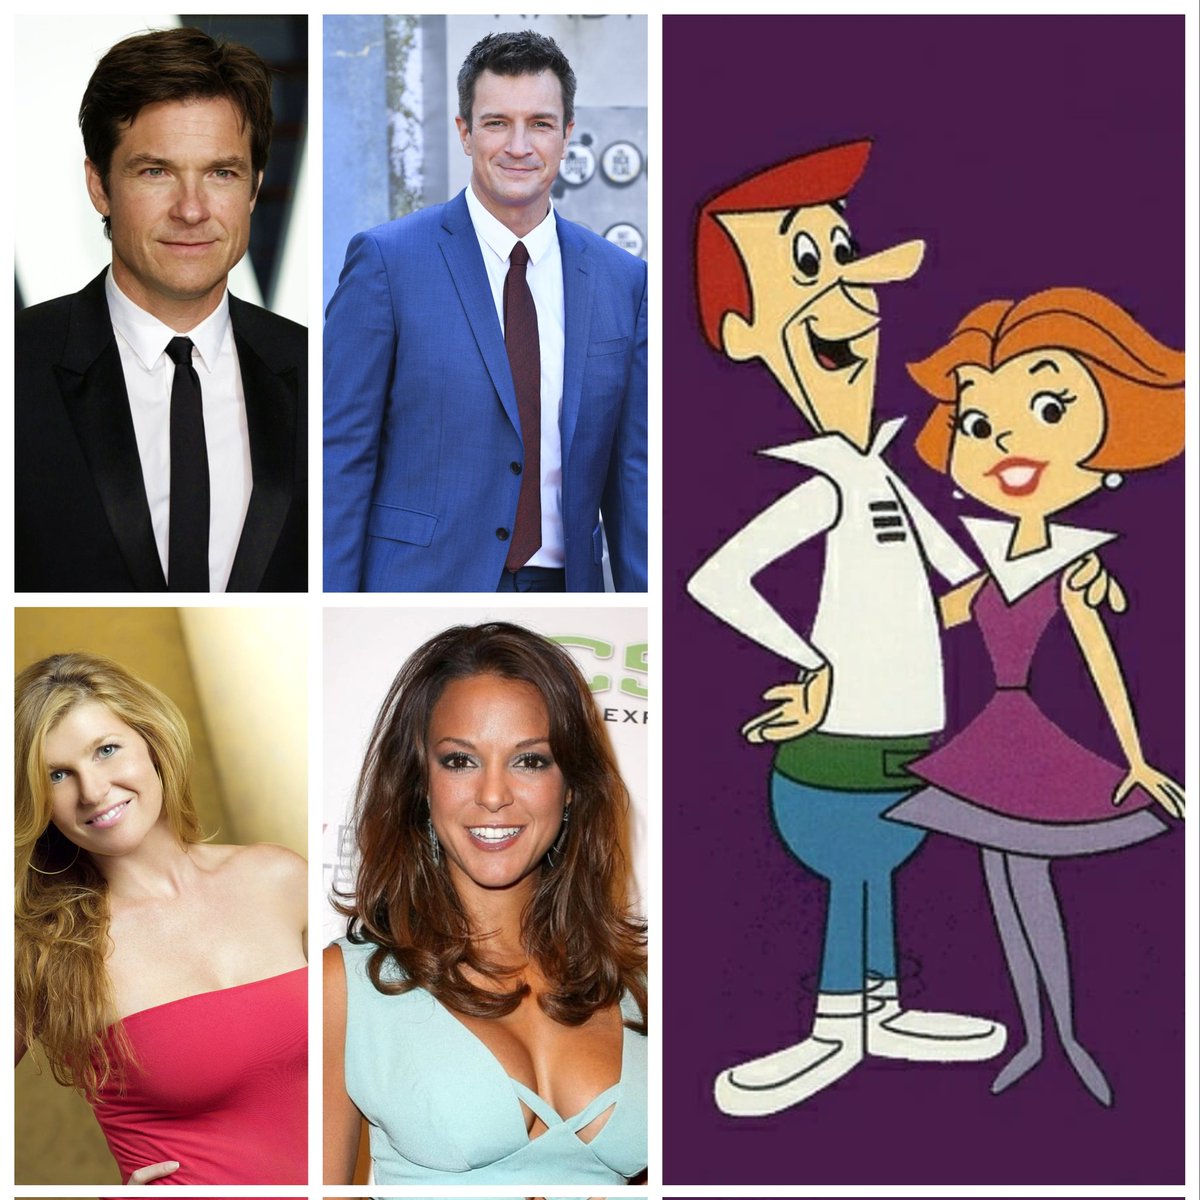 I nominated @batemanjason or @NathanFillion as #GeorgeJetson and @conniebritton or @ImEvaLaRue as #JaneJetson in #TheJetsonsMovie. #TheJetsons